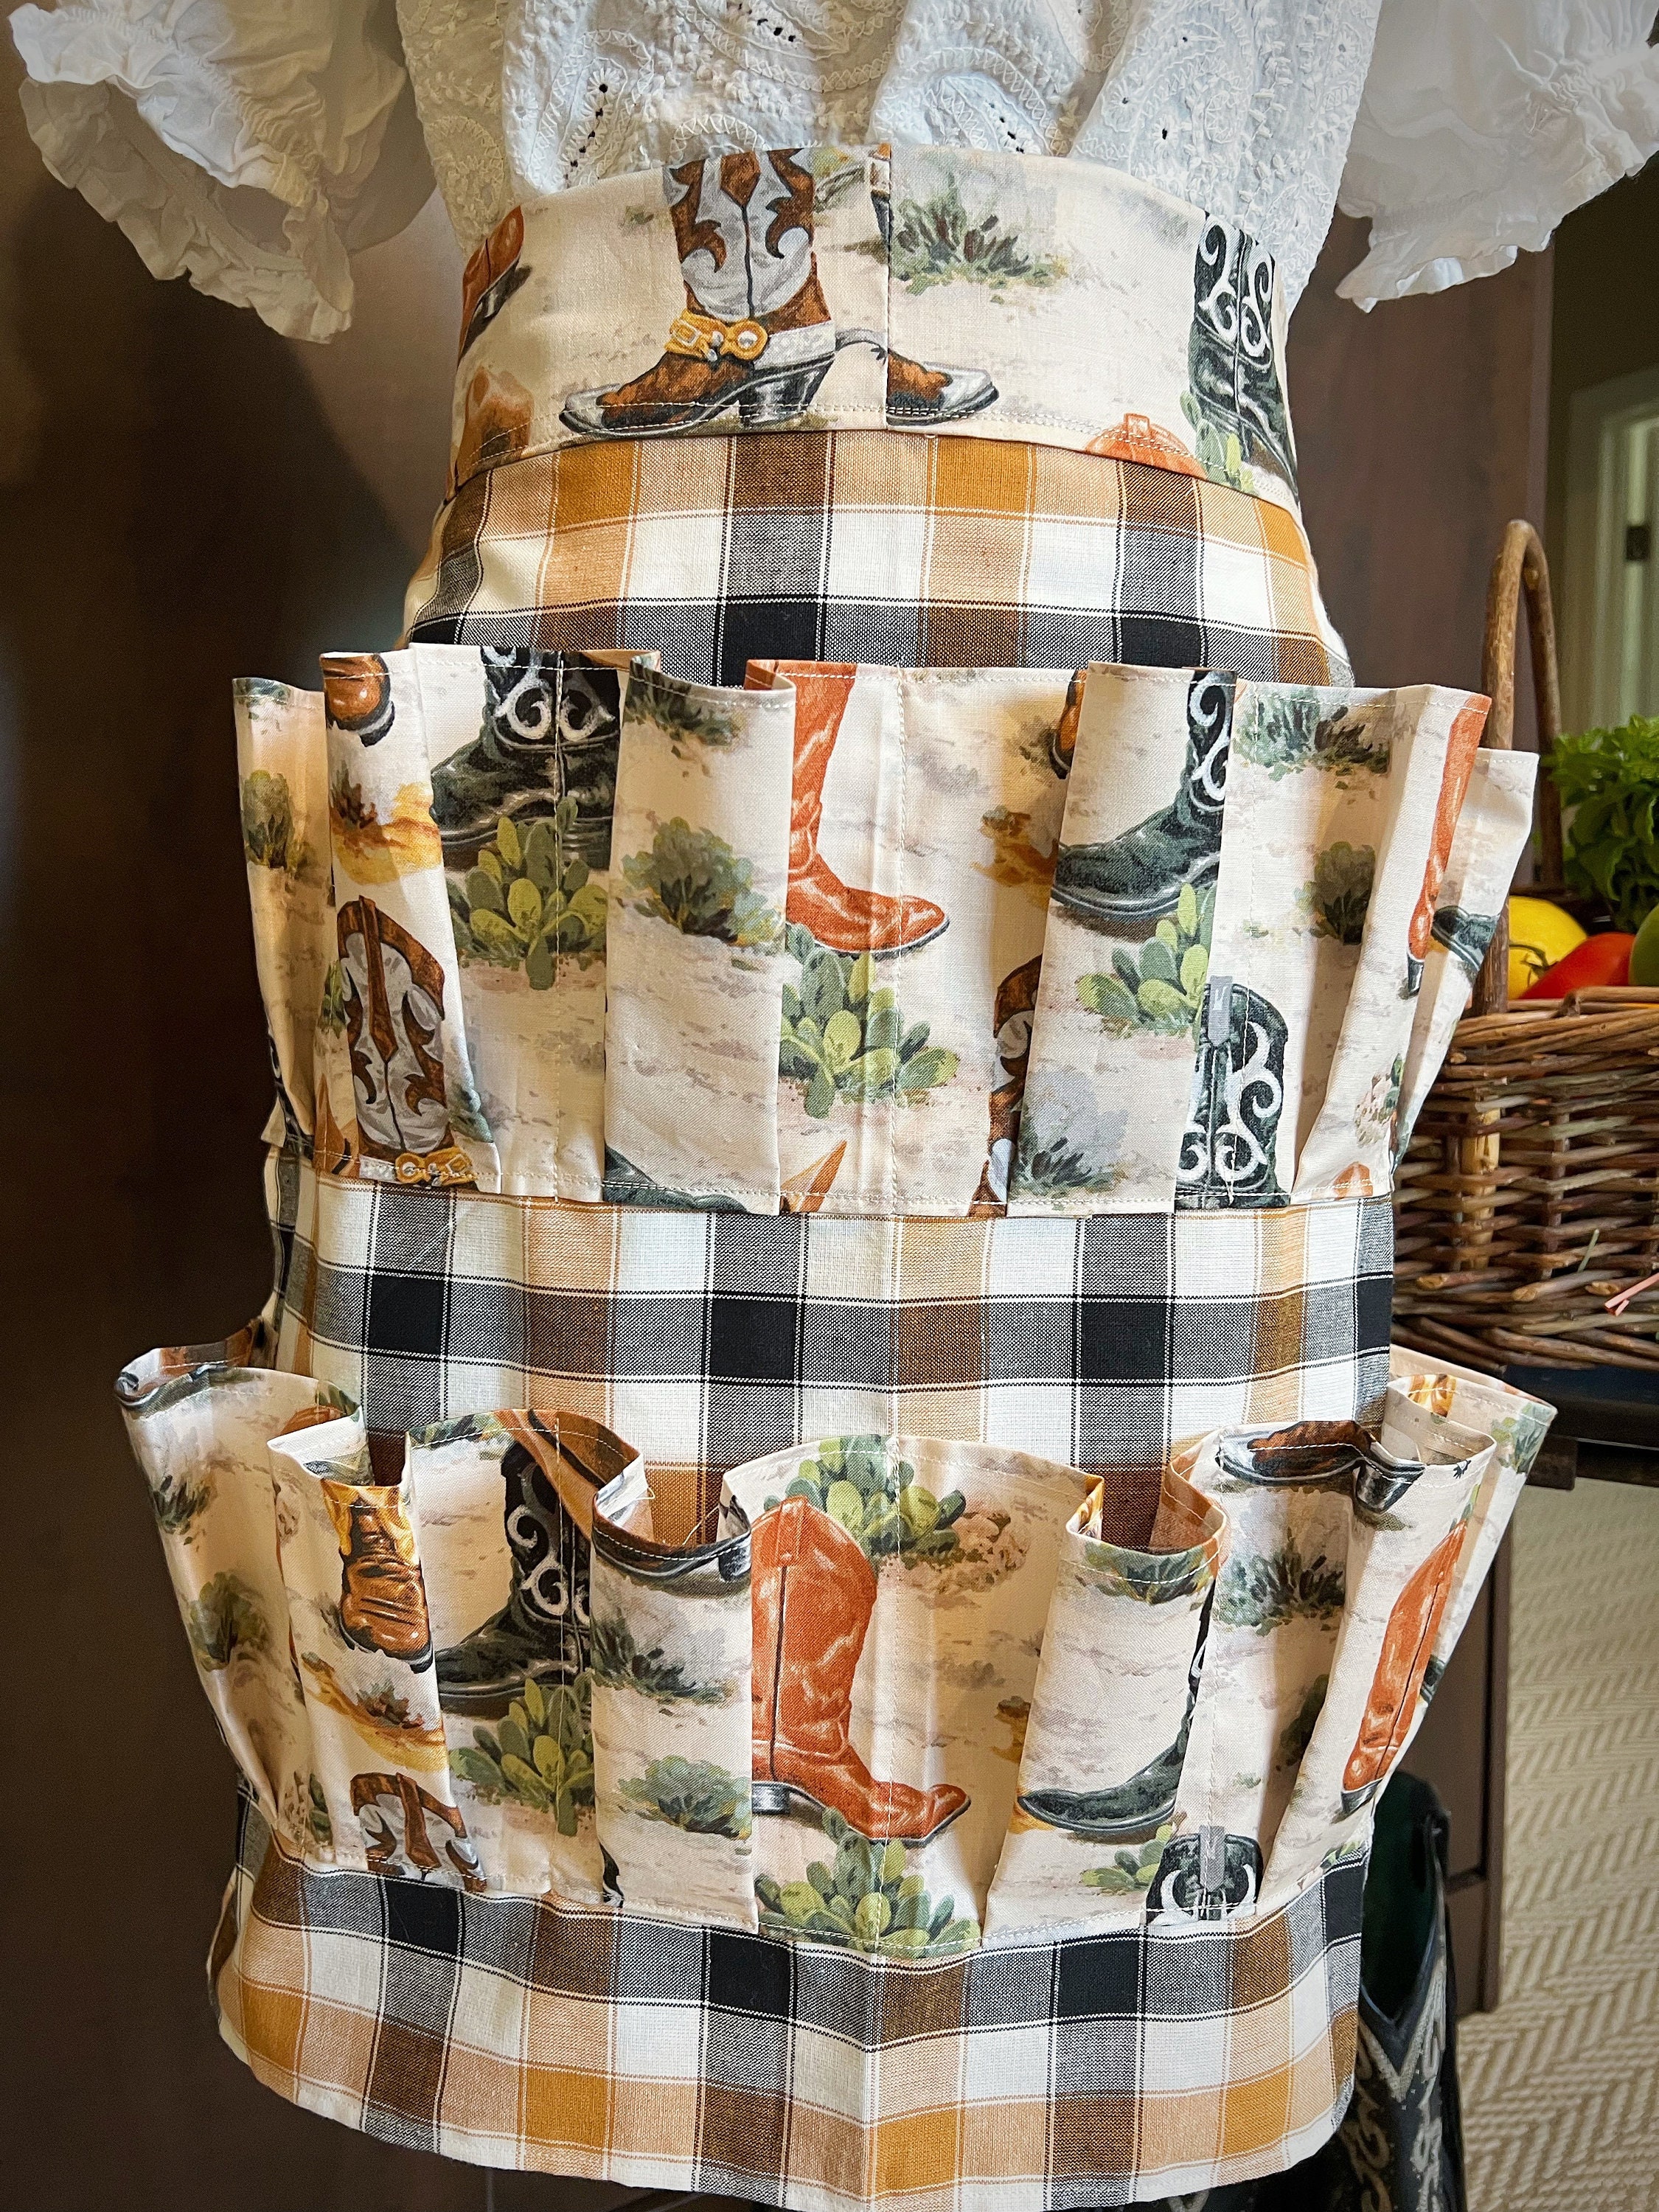 Egg Apron for Collecting Eggs -  UK